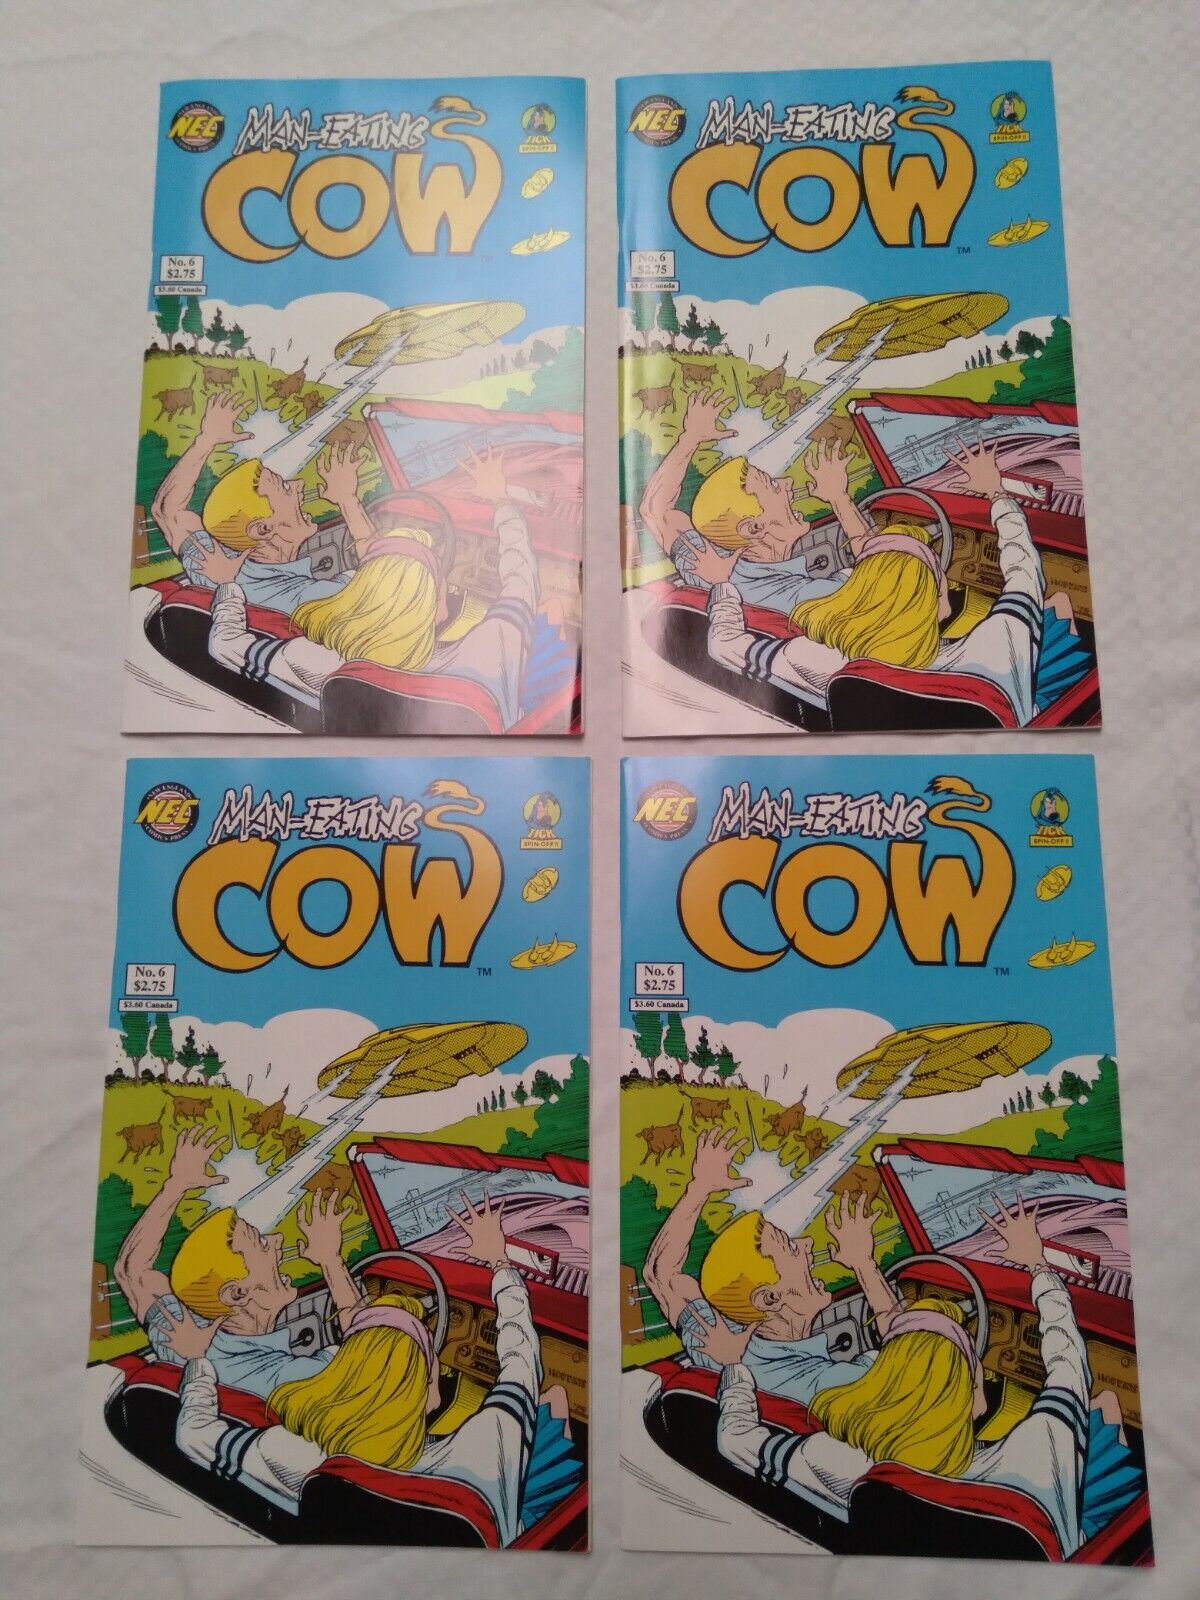 Man-Eating Cow # 6 Four copies  1992 The Tick spin-off #300